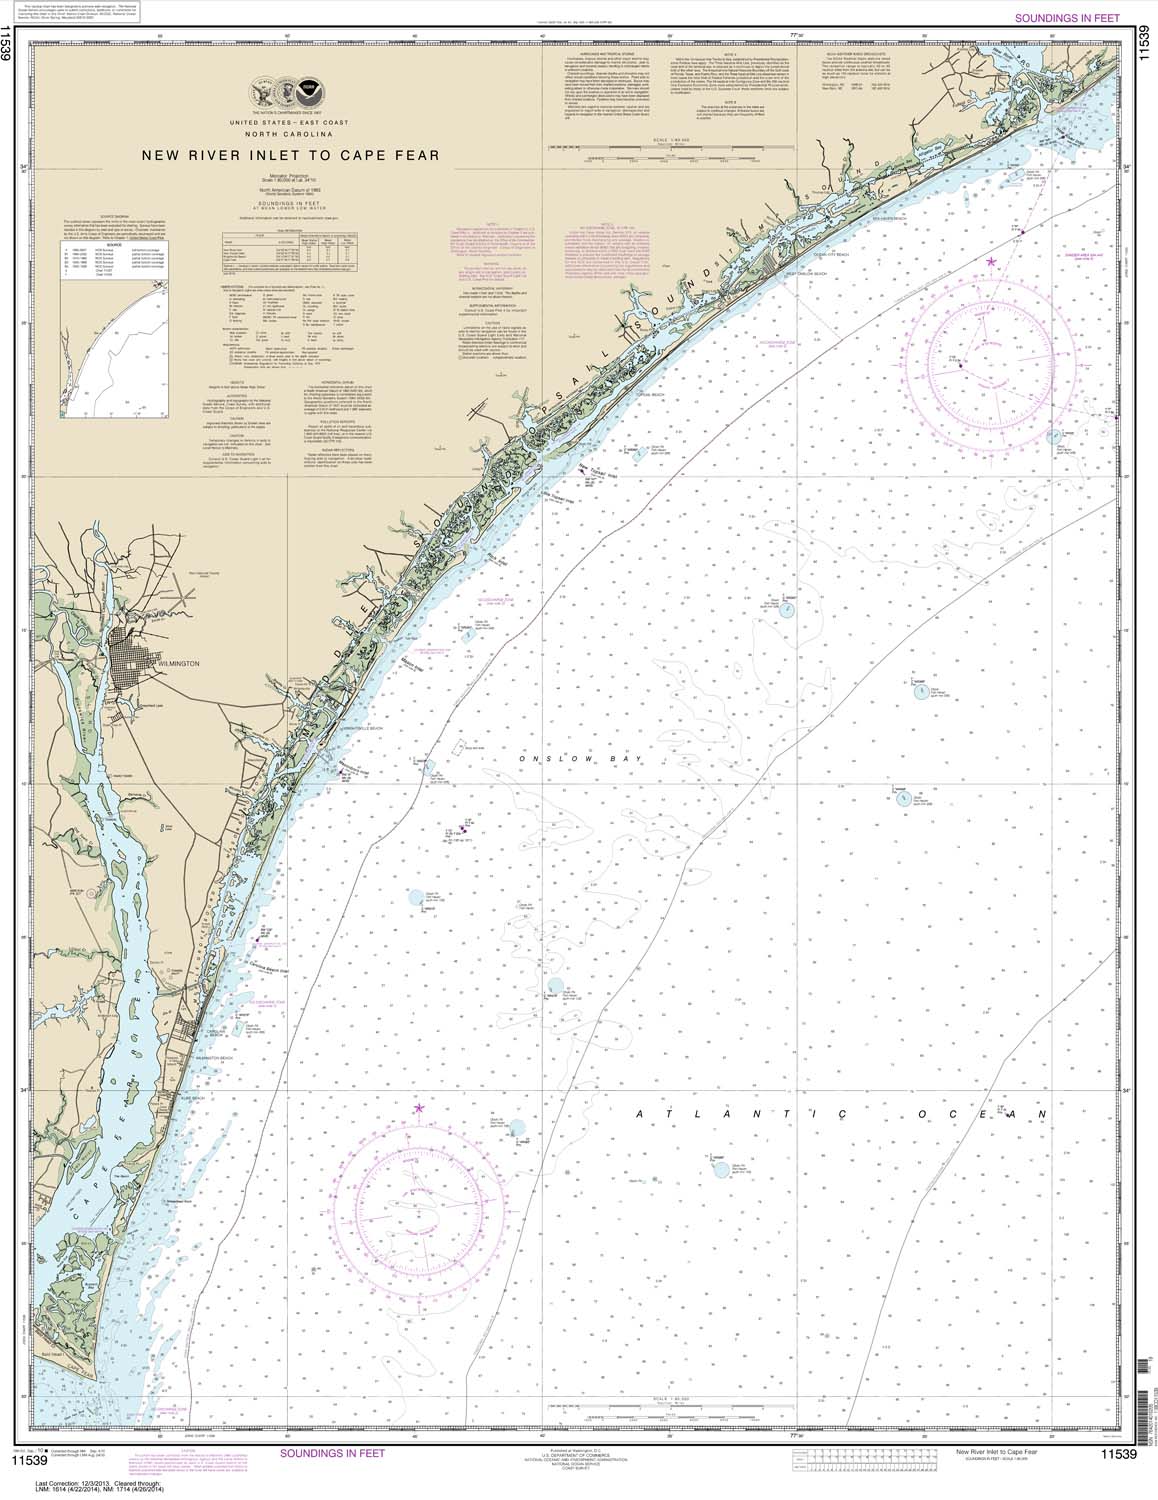 HISTORICAL NOAA Chart 11539: New River Inlet to Cape Fear